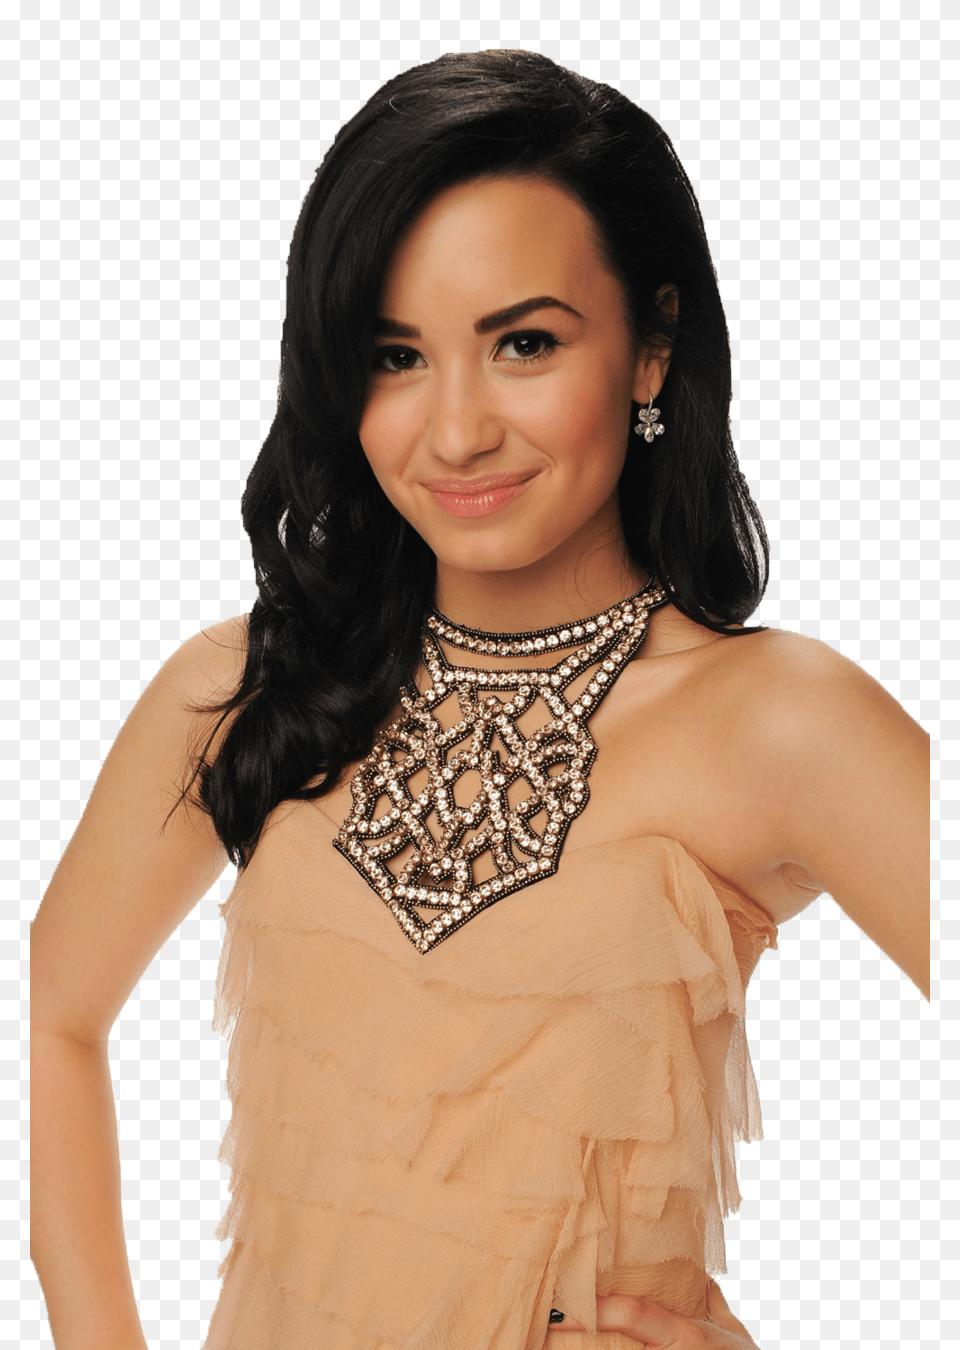 Clipart Demi Lovato And Featured Illustration Demi Lovato 2010, Accessories, Necklace, Jewelry, Clothing Free Transparent Png